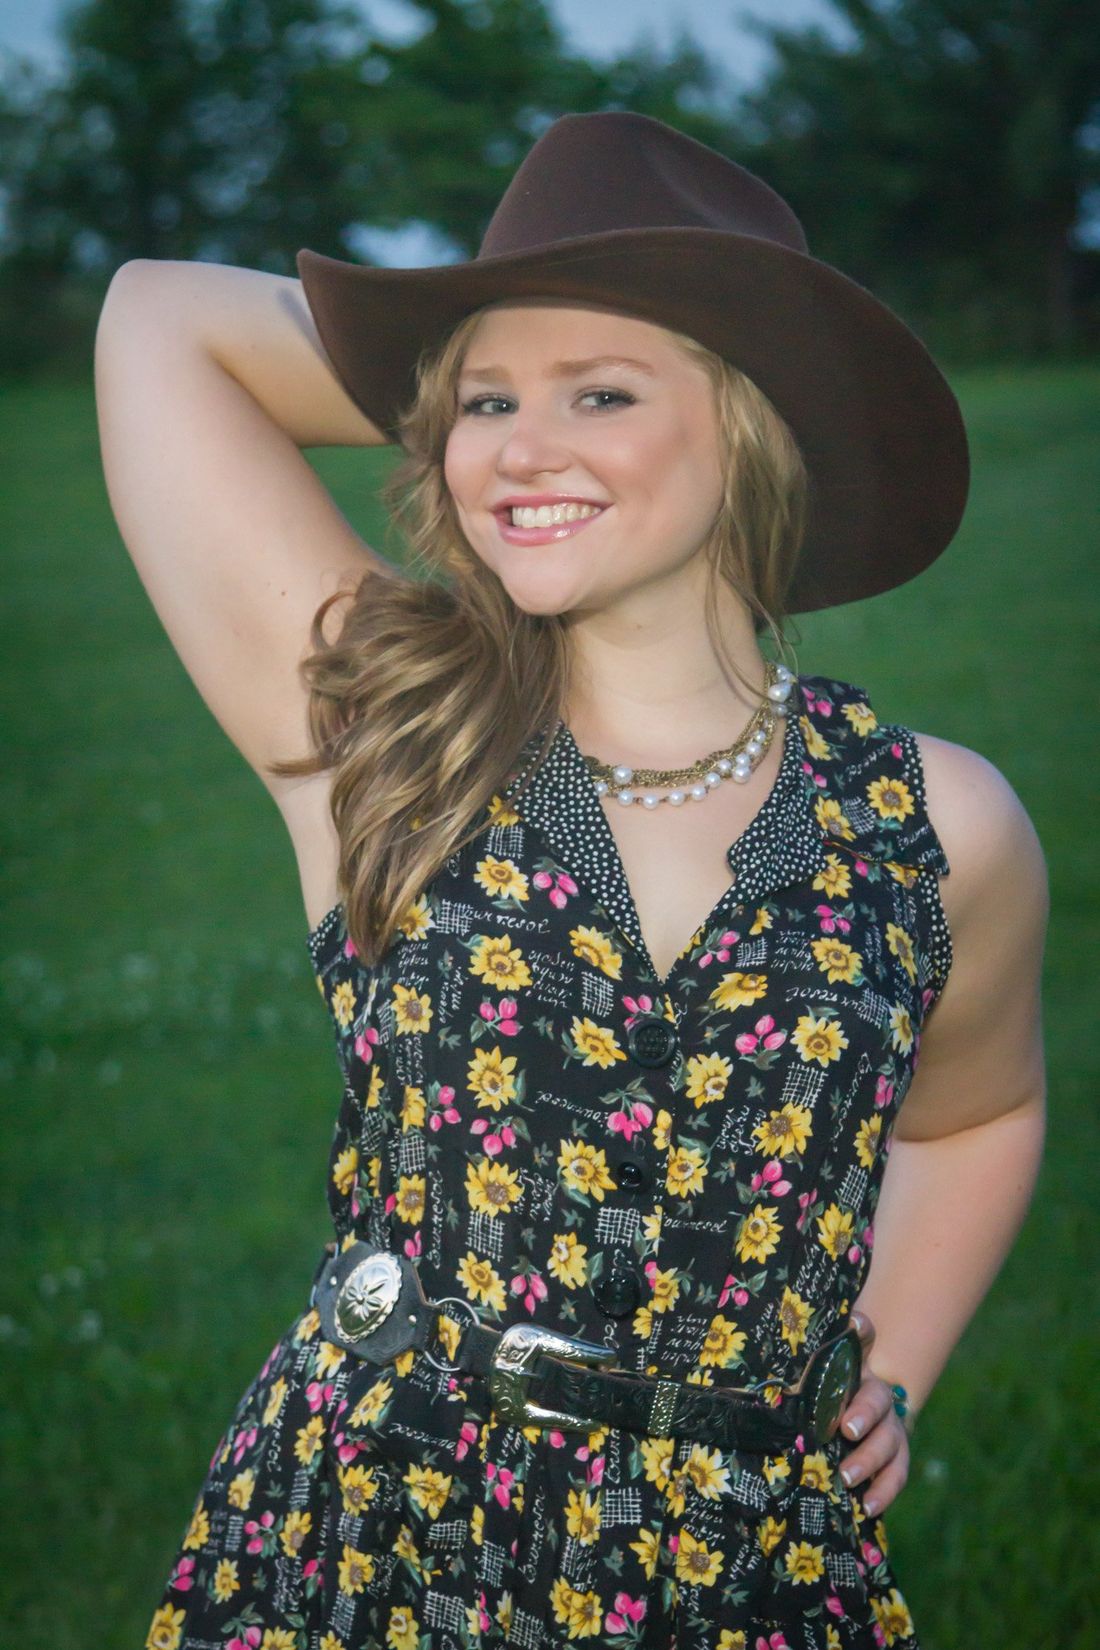 An outdoor portrait of a girl in a flowered dress holding a cowboy hat with a field and woods in the background